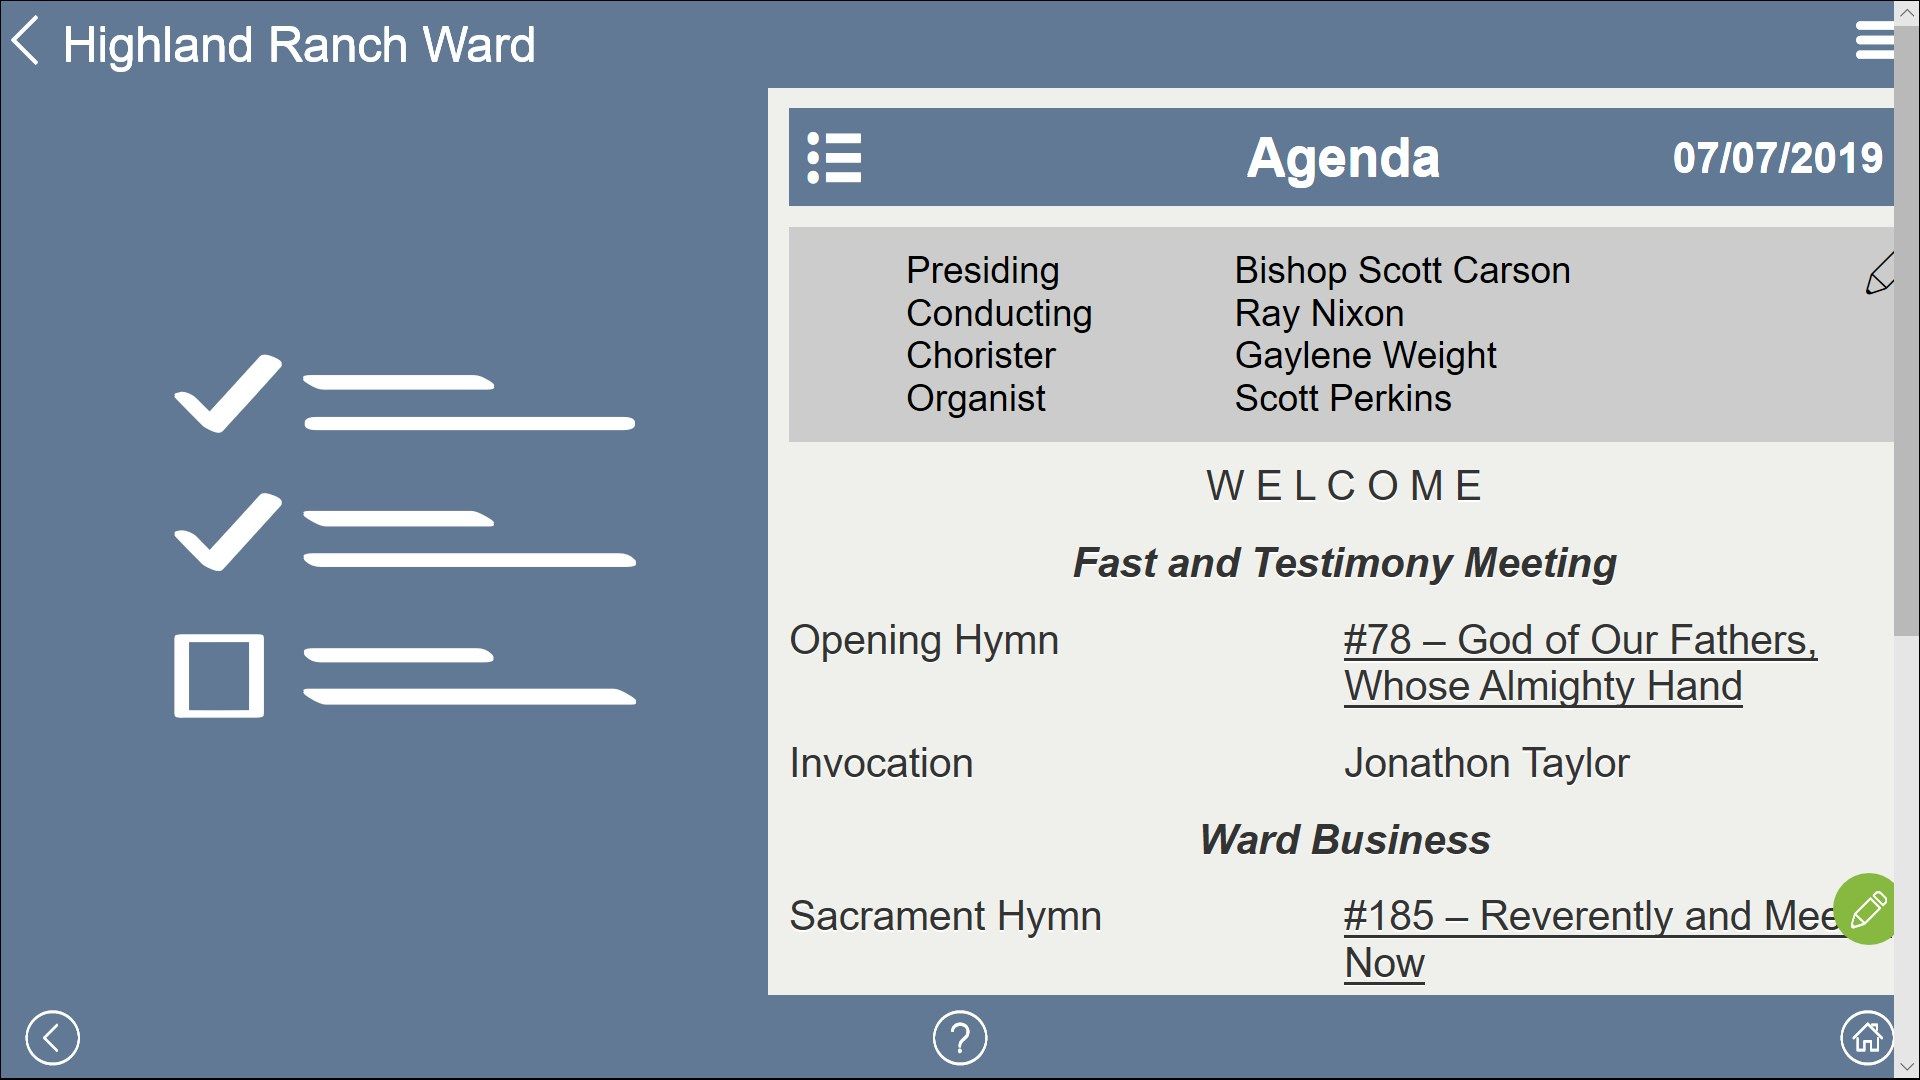 The Agenda for your meeting includes hotlinks to the Church's "Music" app.